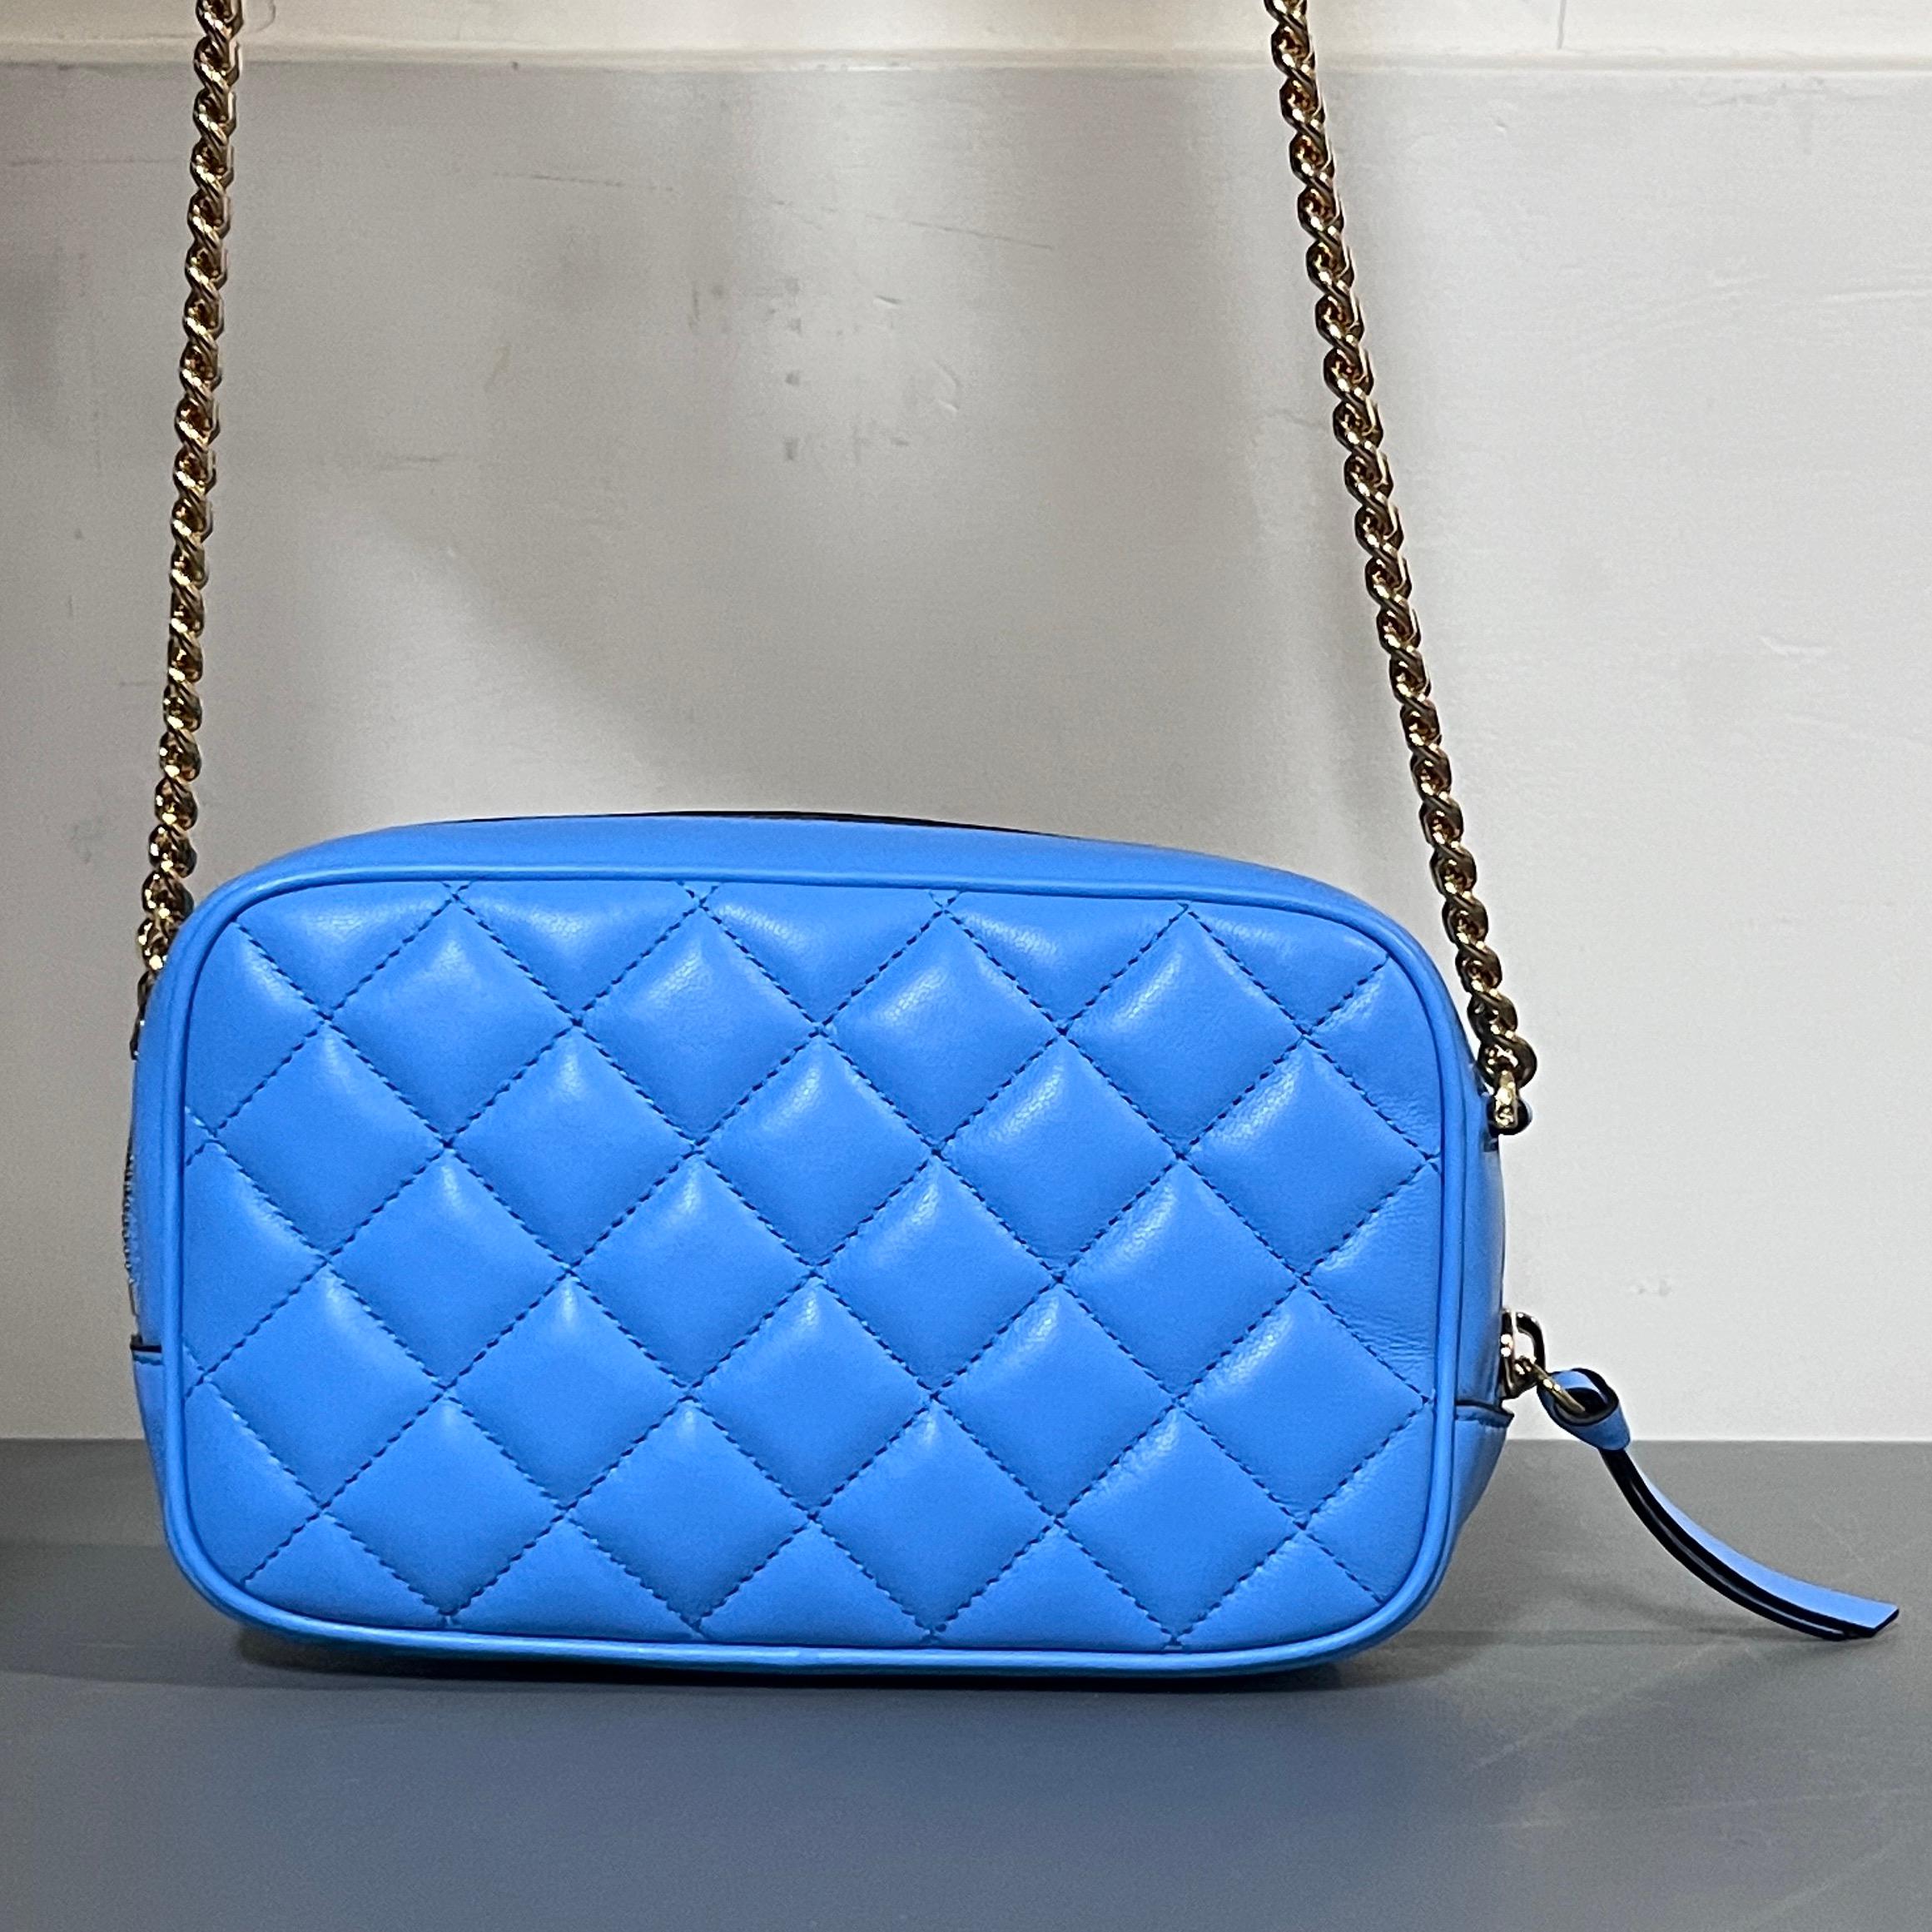 Women's new VERSACE blue lambskin leather quilted gold Medusa chain crossbody bag Small